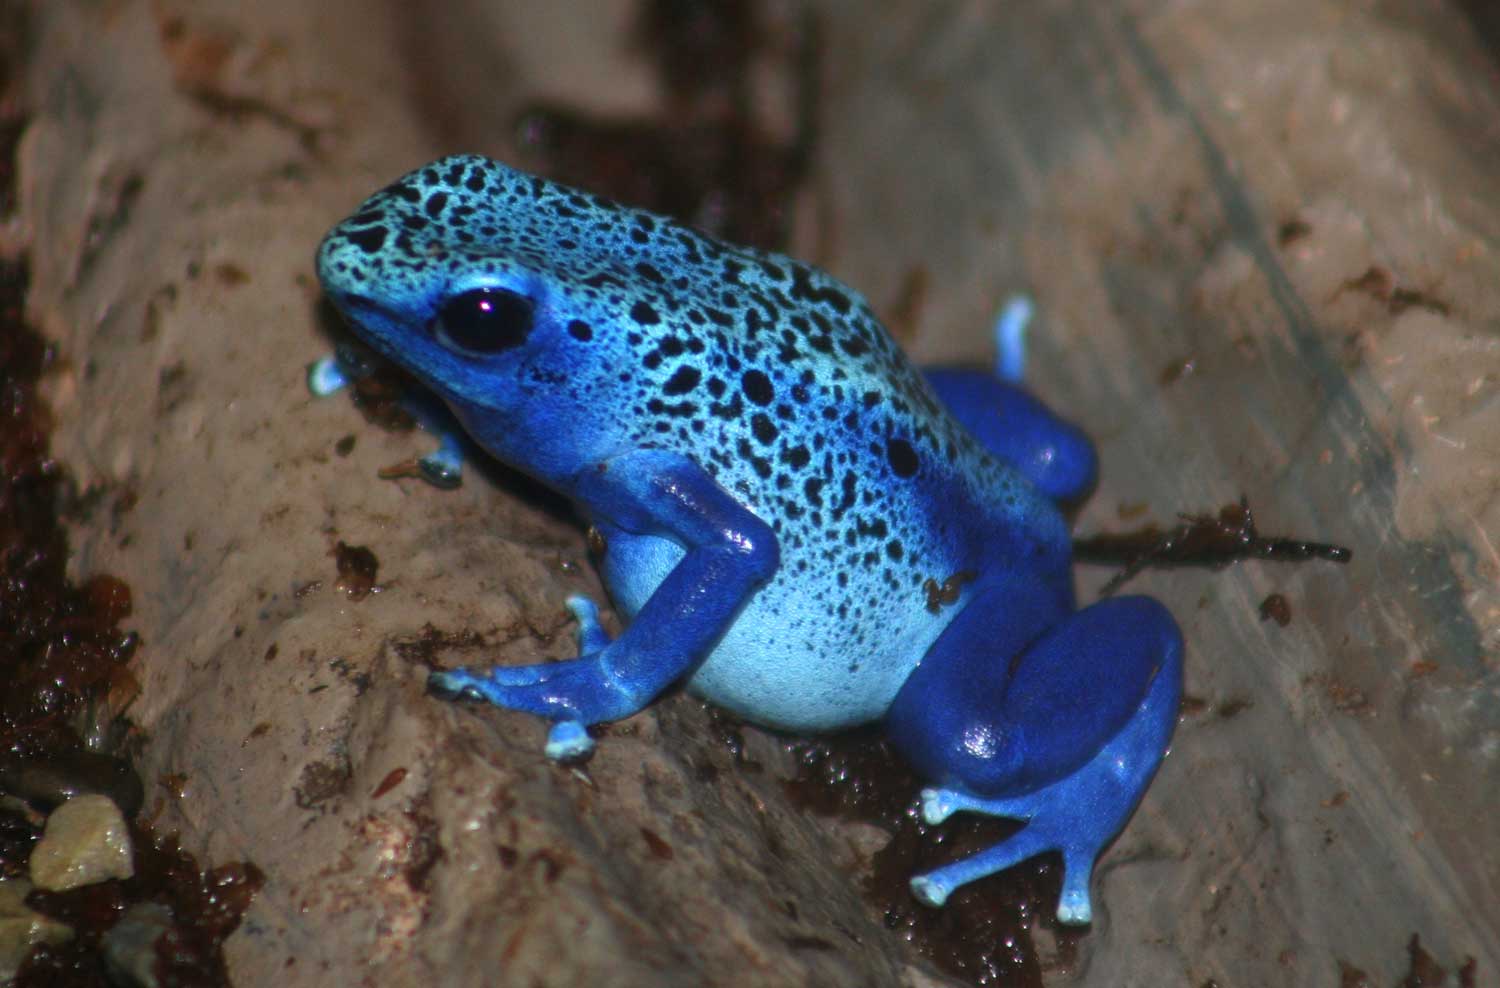 A bright blue speckled frog